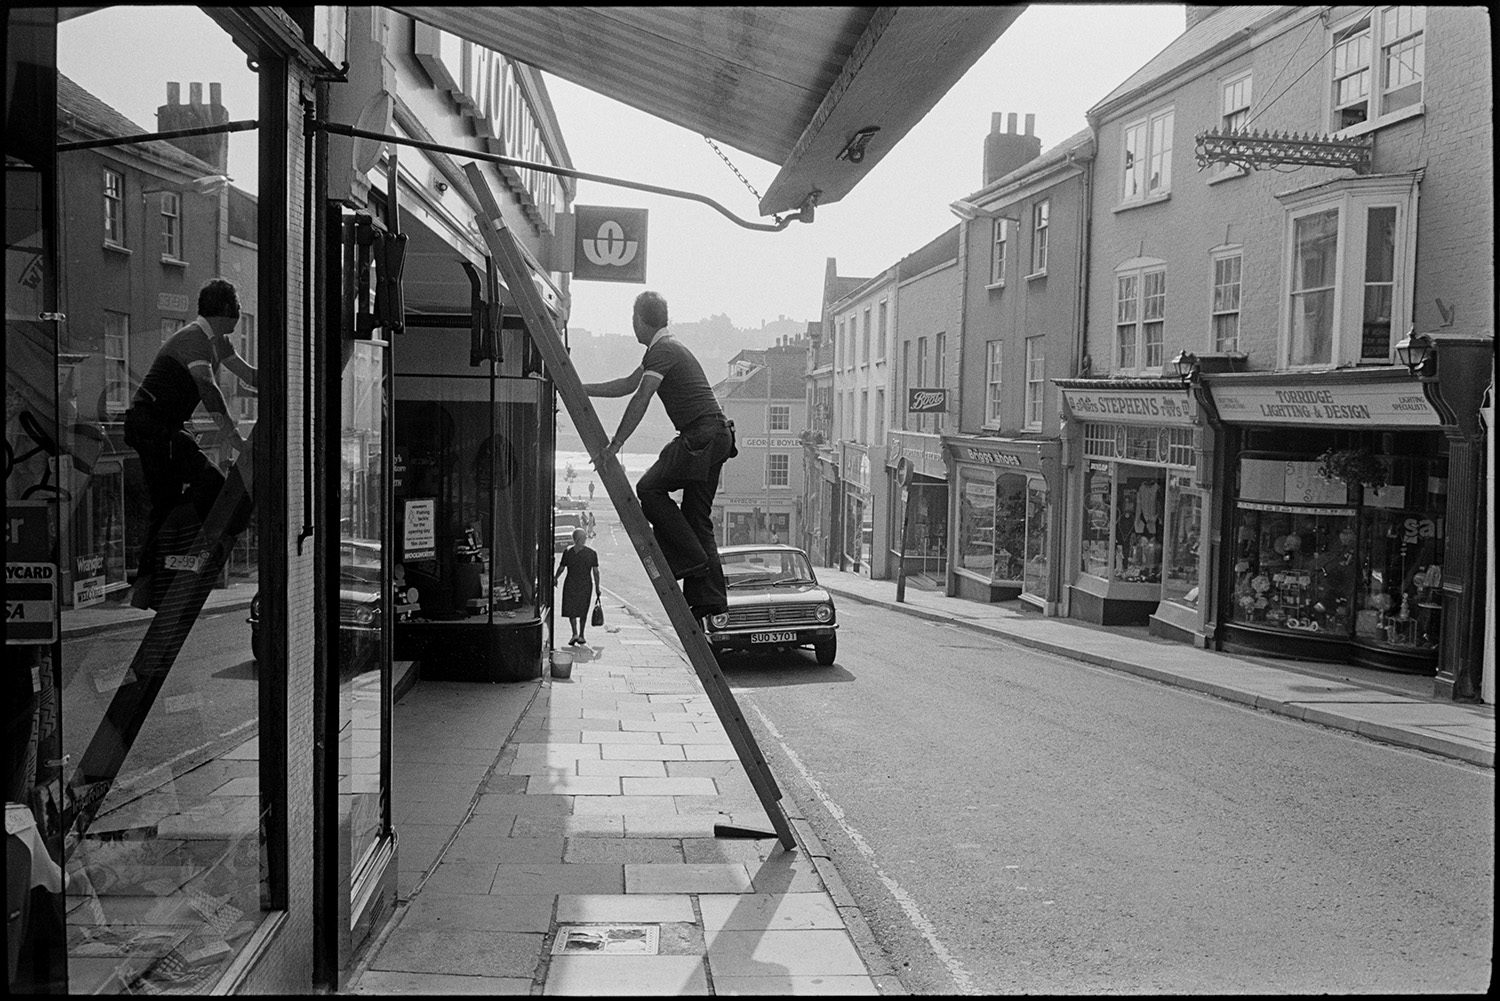 Window cleaner up ladder in front of shop in high street, early morning sun. 
[A man climbing a ladder to clean a shop window in Bideford High Street. Other shop fronts can be seen along the street, including Torridge Lighting and Design, Stephens, Briggs Shoes and Boots.]